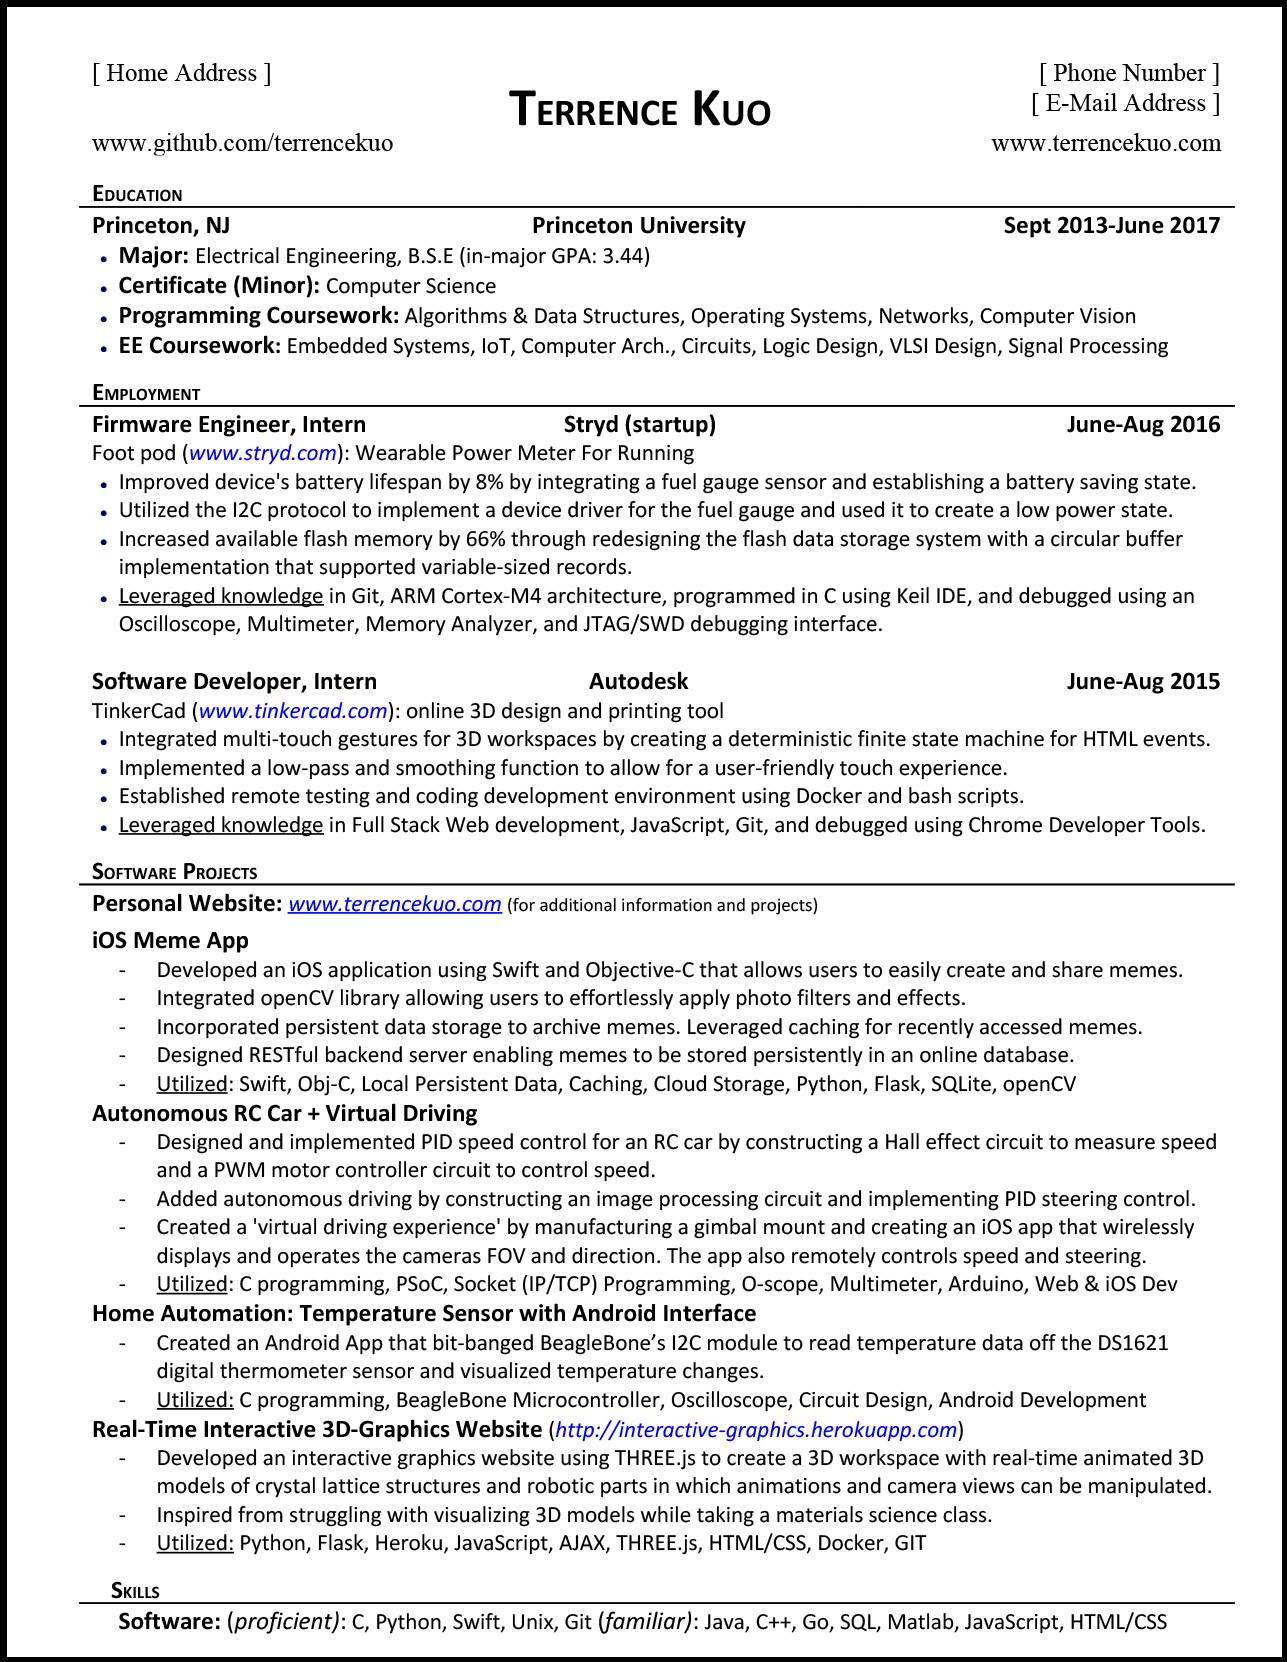 Software Engineer Resume Template Free Download How to Write A Killer software Engineering RÃ©sumÃ©